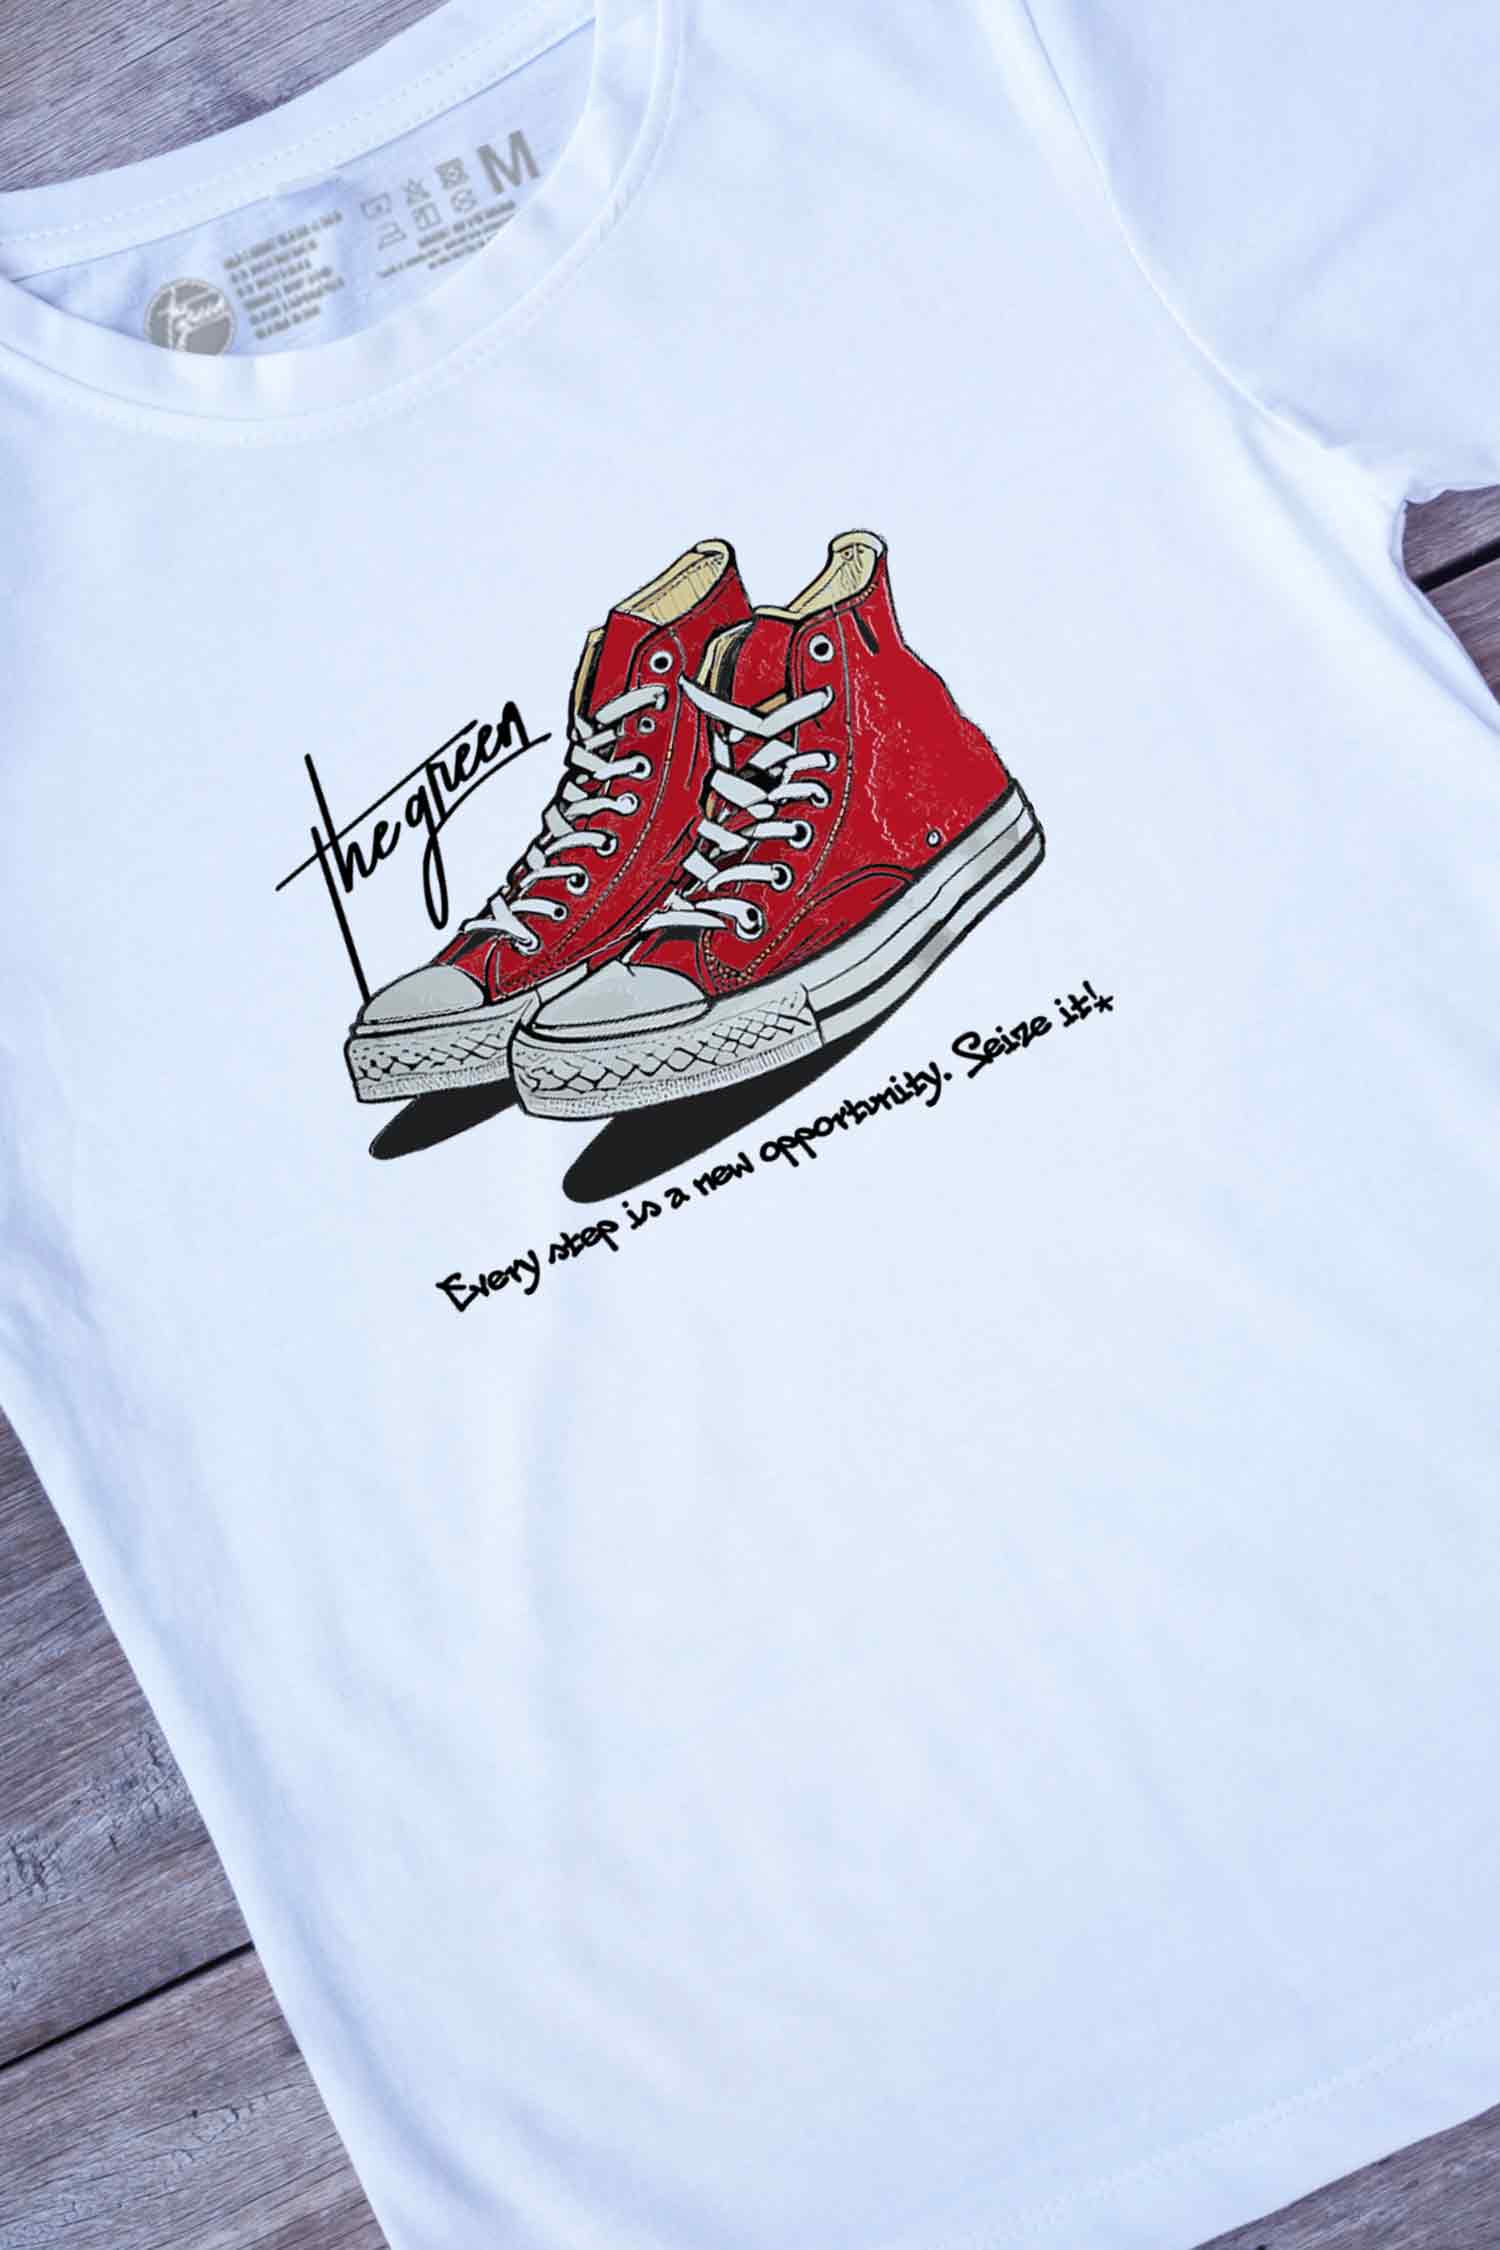 【THE GREEN】スタイリッシュな一枚！/ レッド・ハイカット・スニーカーTシャツ - Red High Cut Sneaker Tee  /cotton 100%/size:XS-XXL